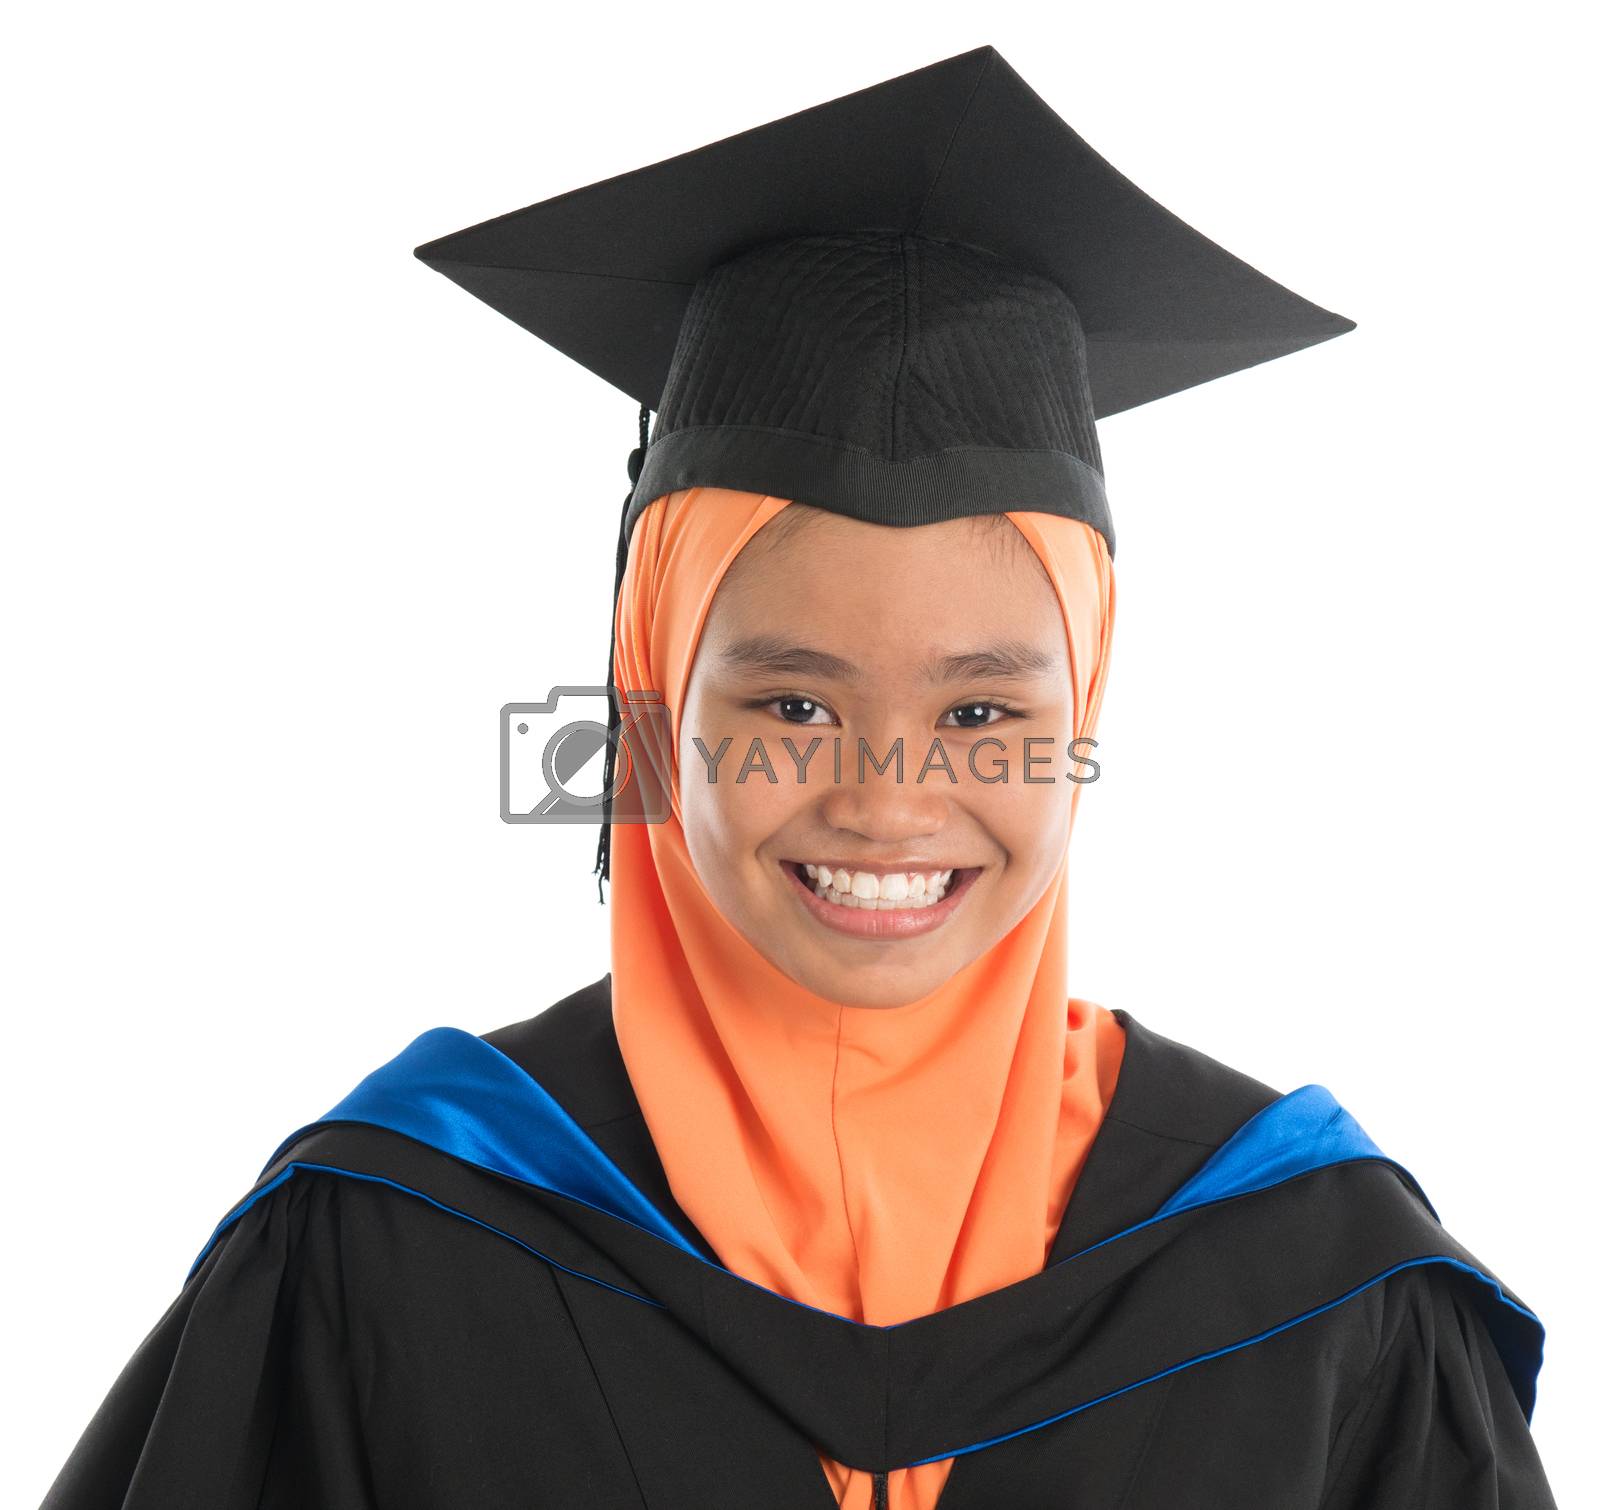 Royalty free image of Female student in graduation gown by szefei